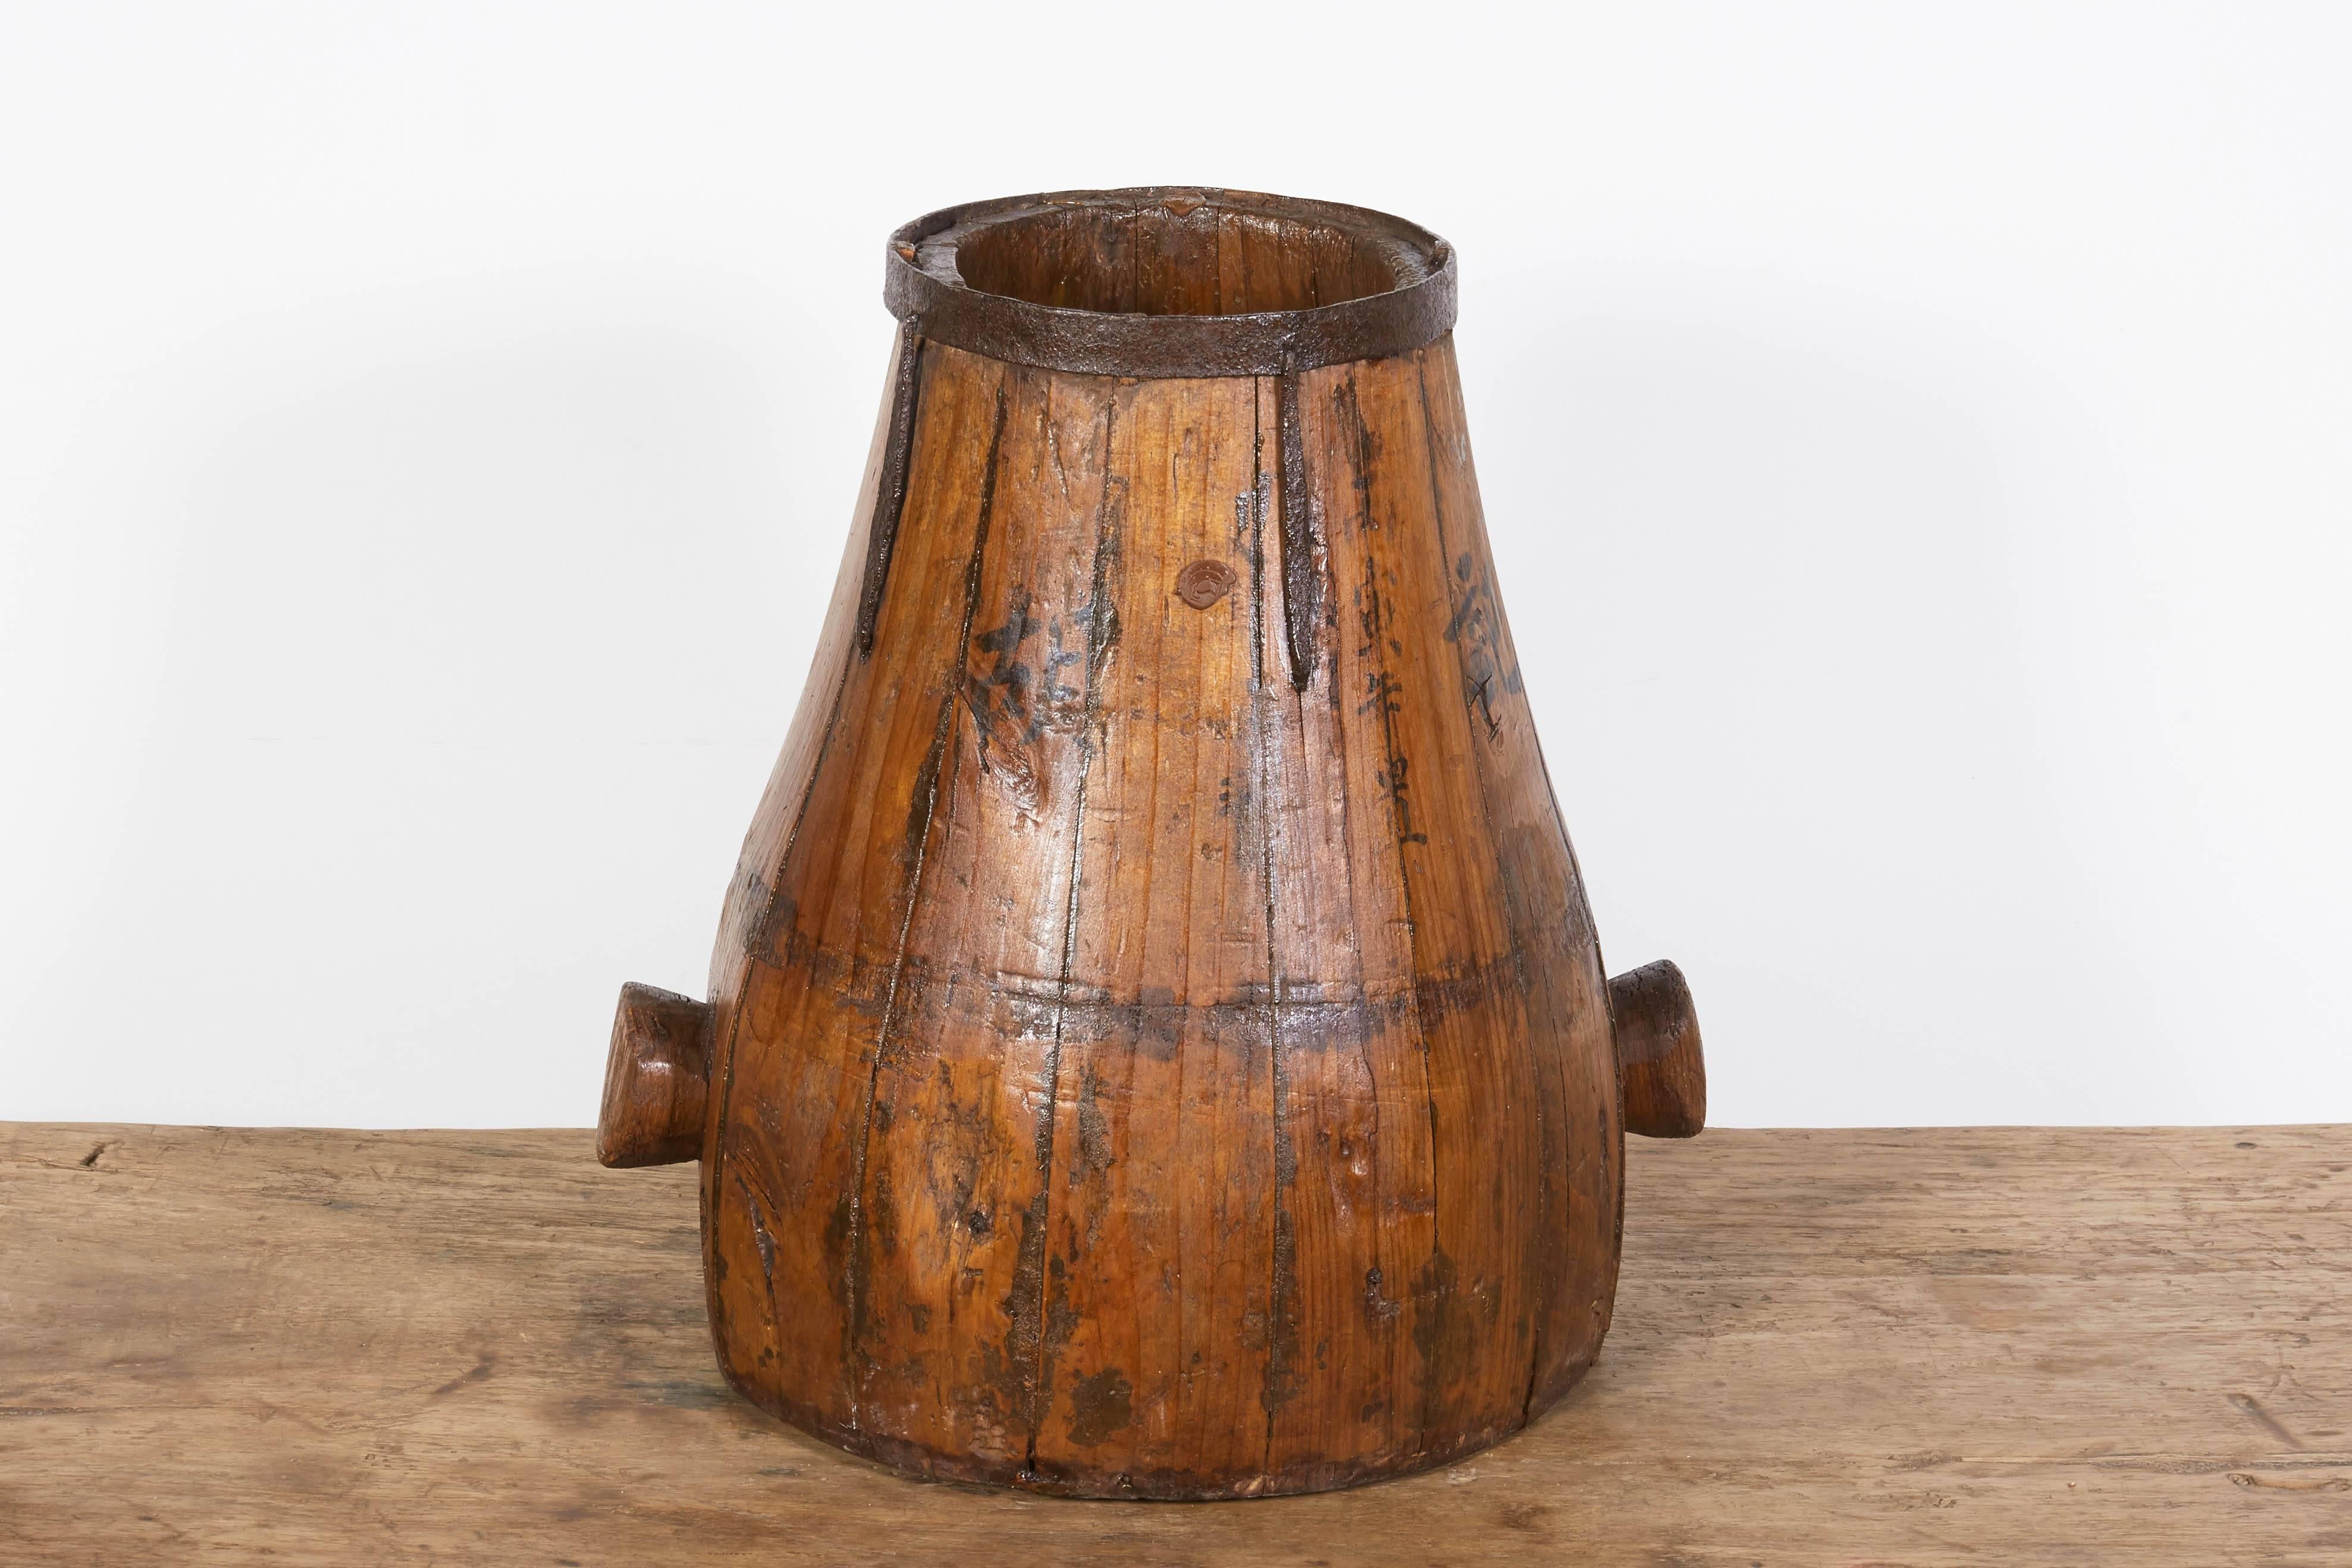 An unusually shaped antique Chinese rice container made of beautifully worn pinewood with original iron decoration, carved handles and several attractive hand-painted Chinese characters. From Hunan Province, circa 1880.
BT371.